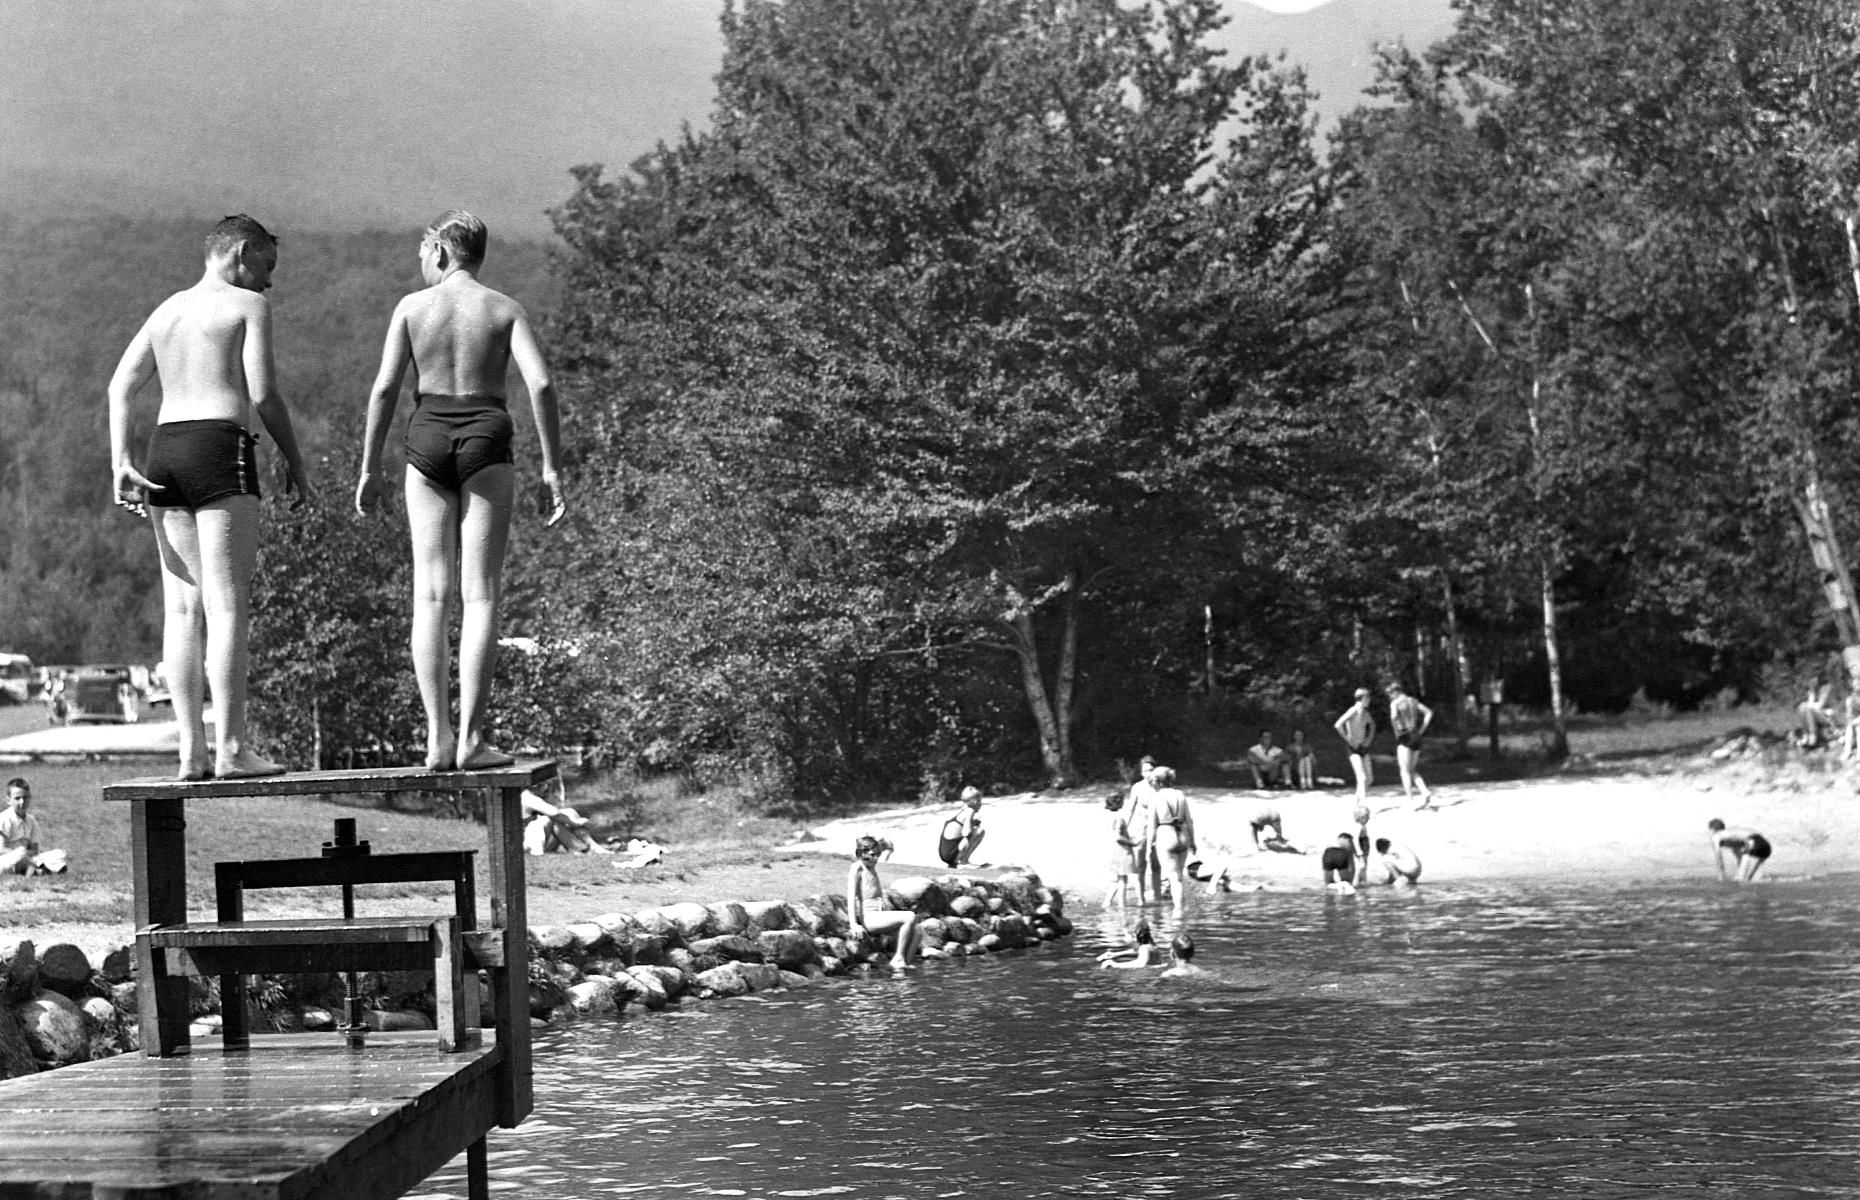 Some families eschewed the coast in favor of a woodland escape, opting for forested campsites or trailer parks like this one in New Hampshire. In this 1937 photograph, families enjoy the natural swimming pool at the Dolly Copp Forest Camp in the White Mountain National Forest. You can make out a huddle of motorhomes and trailers parked in background.